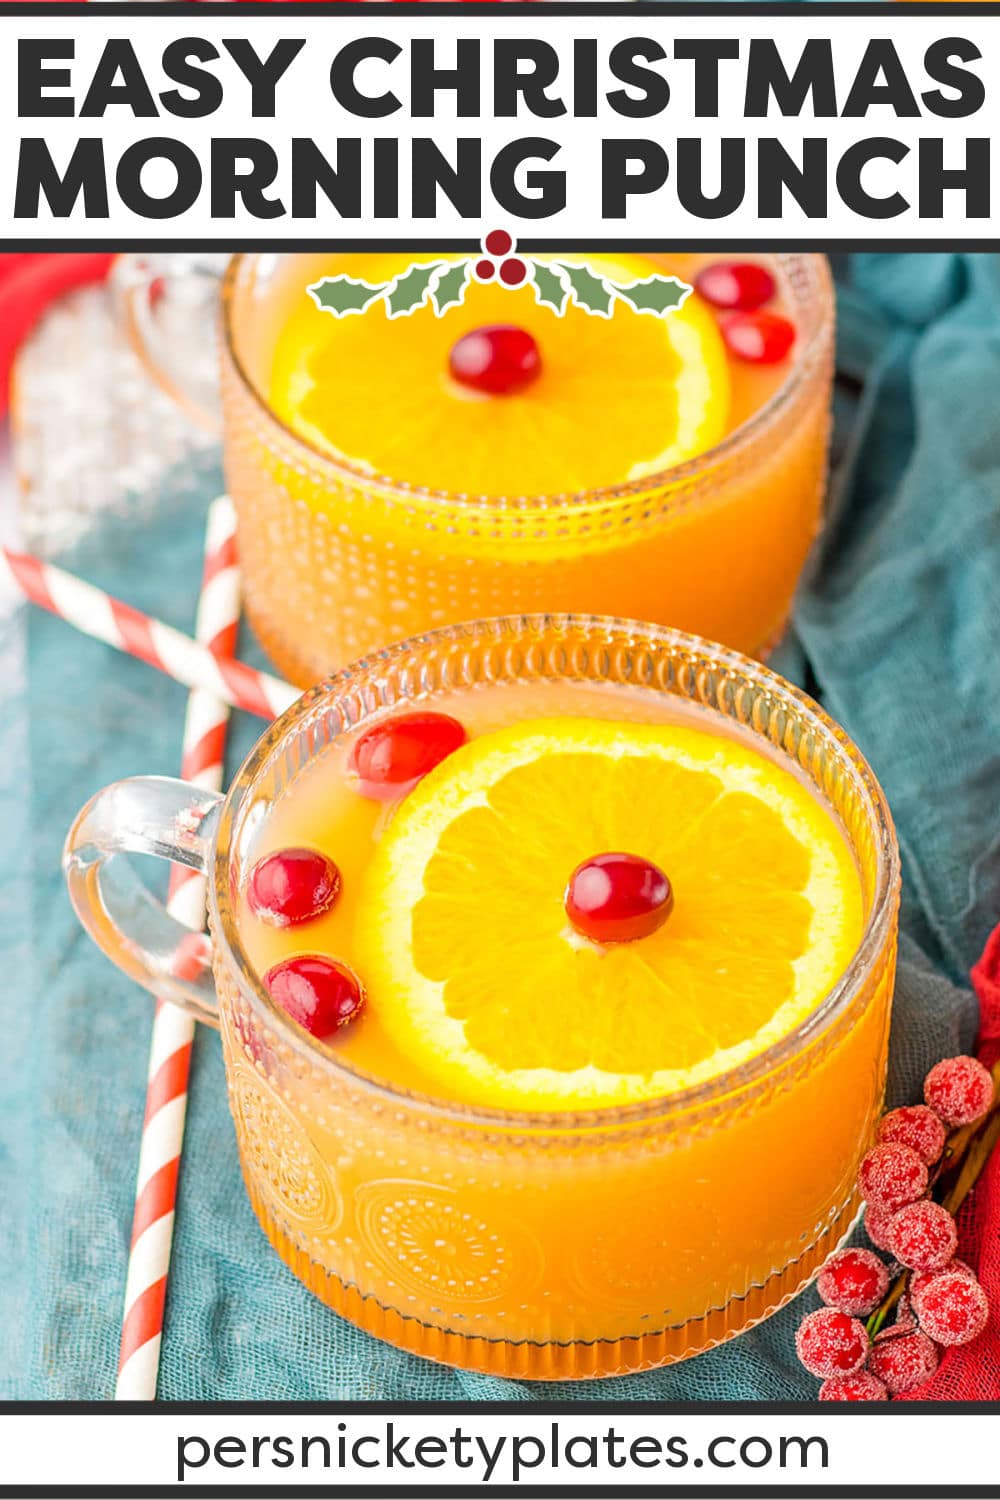 Presents from Santa aren't the only reason to get excited about Christmas morning! This family-friendly and festive Christmas morning punch recipe is a combination of pineapple juice, orange juice, cranberry cocktail, and ginger ale, garnished with cranberries and fresh orange slices, and the perfect way to get the holiday festivities off to a refreshing start! | www.persnicketyplates.com